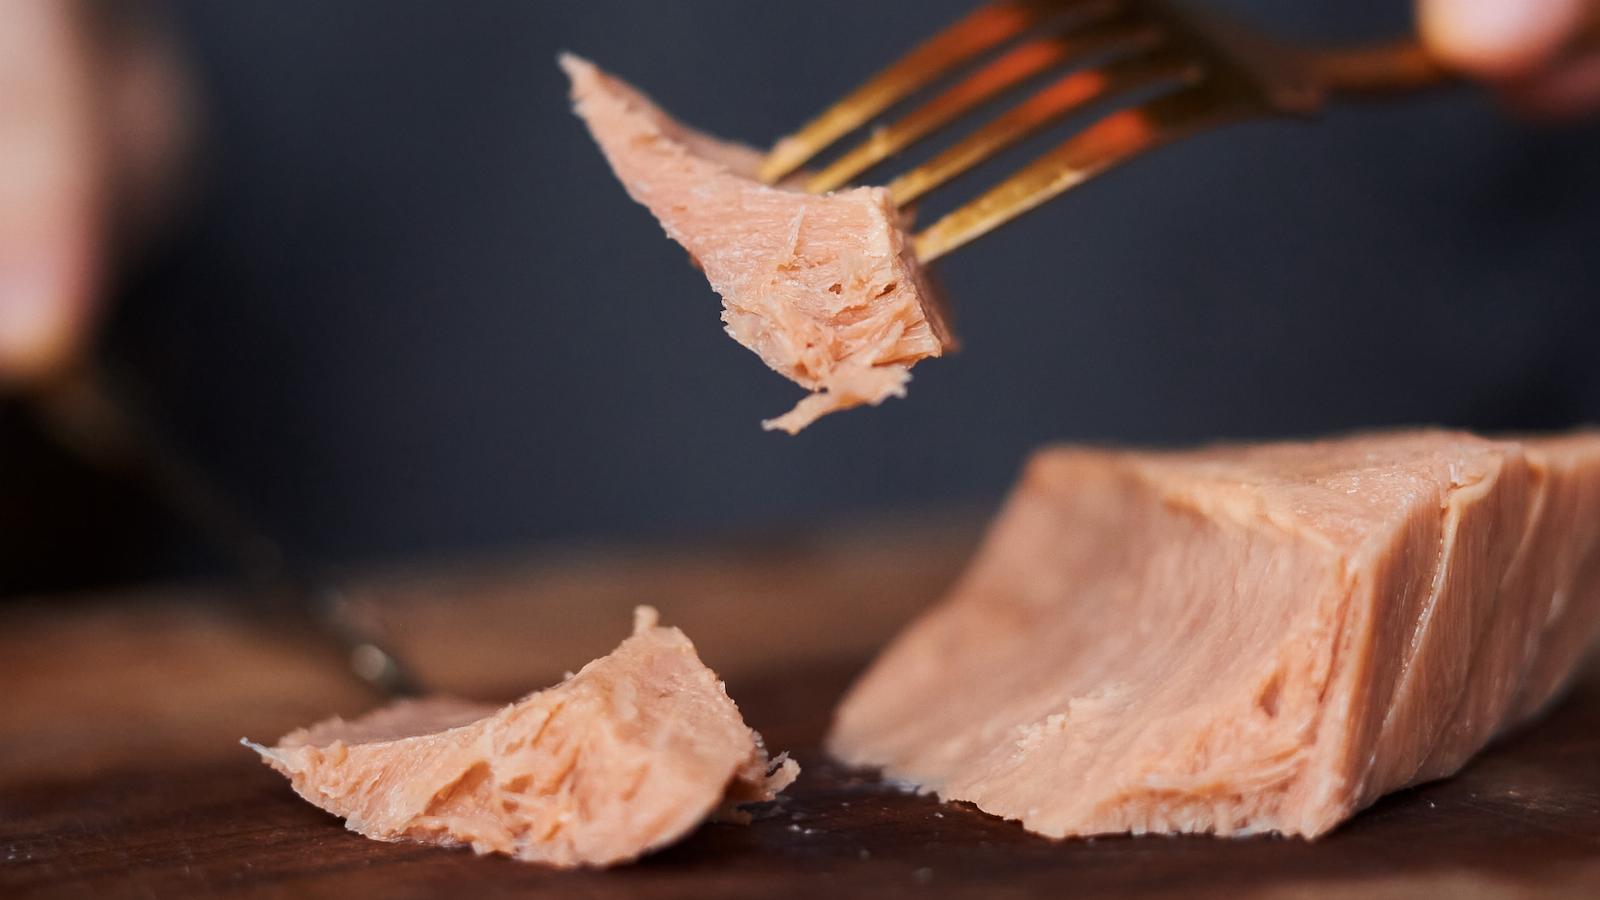 New School Foods’ filet looks and tastes like salmon, but it’s actually plants